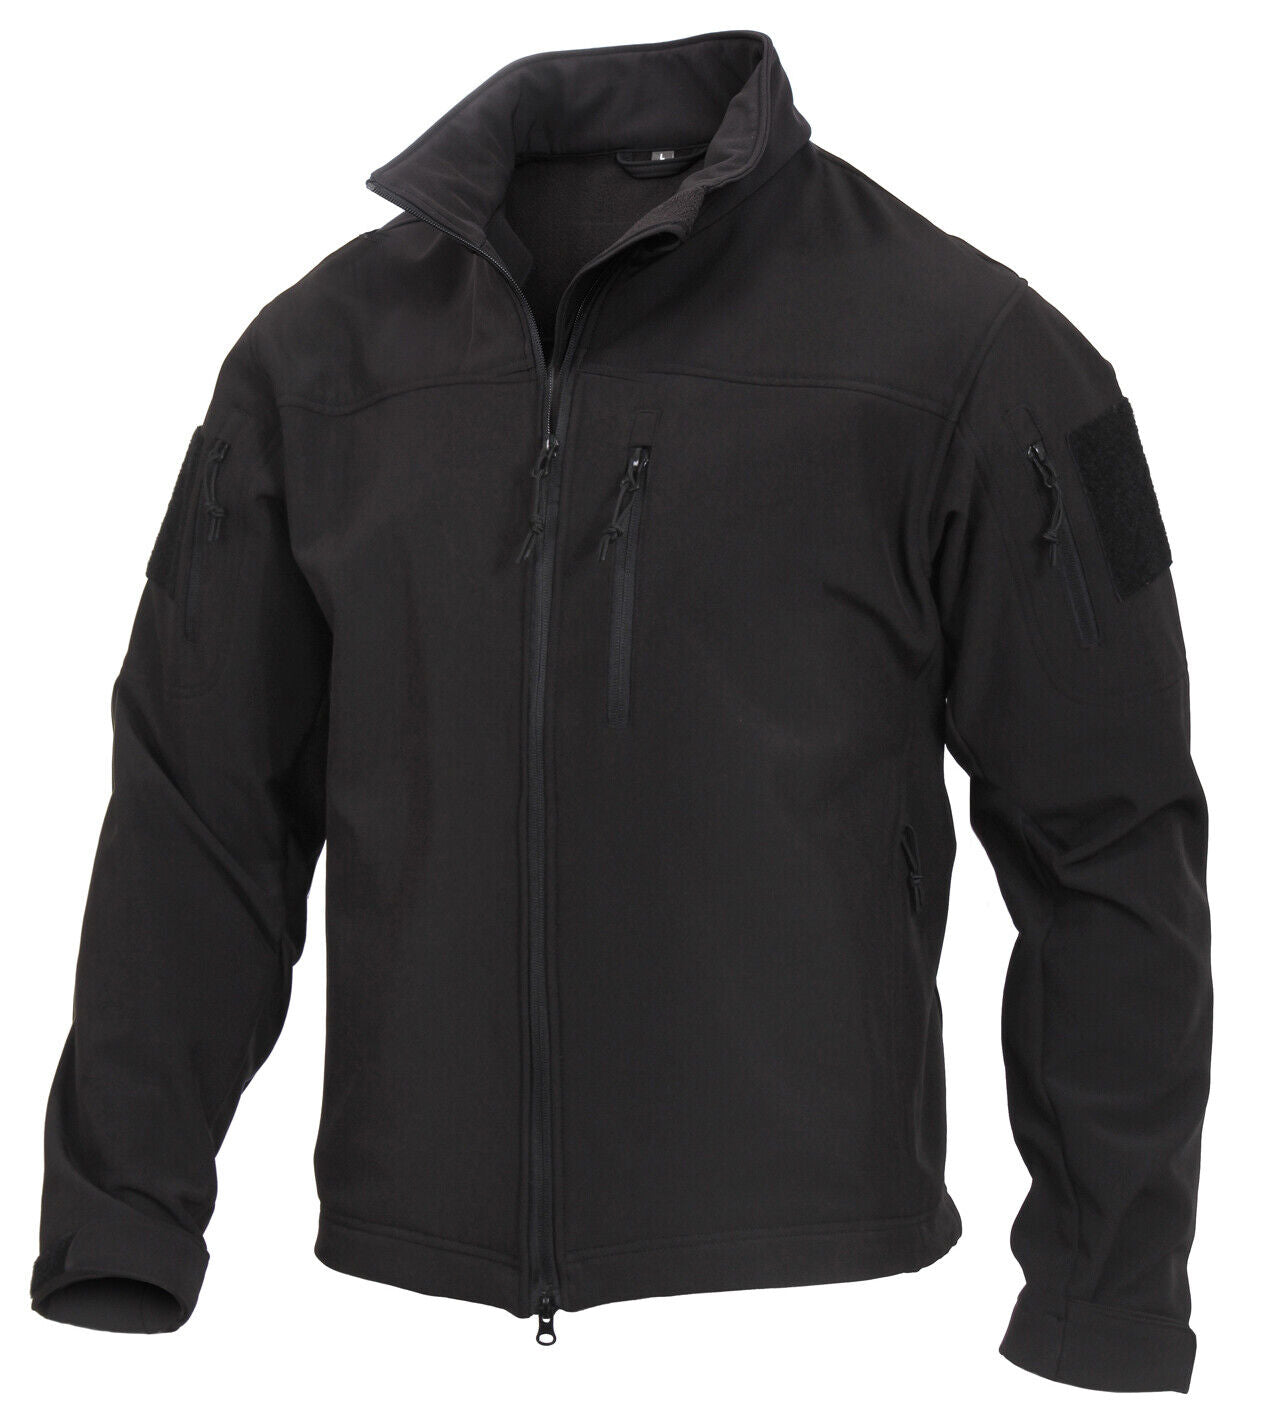 Rothco Stealth Ops Soft Shell Tactical Jacket